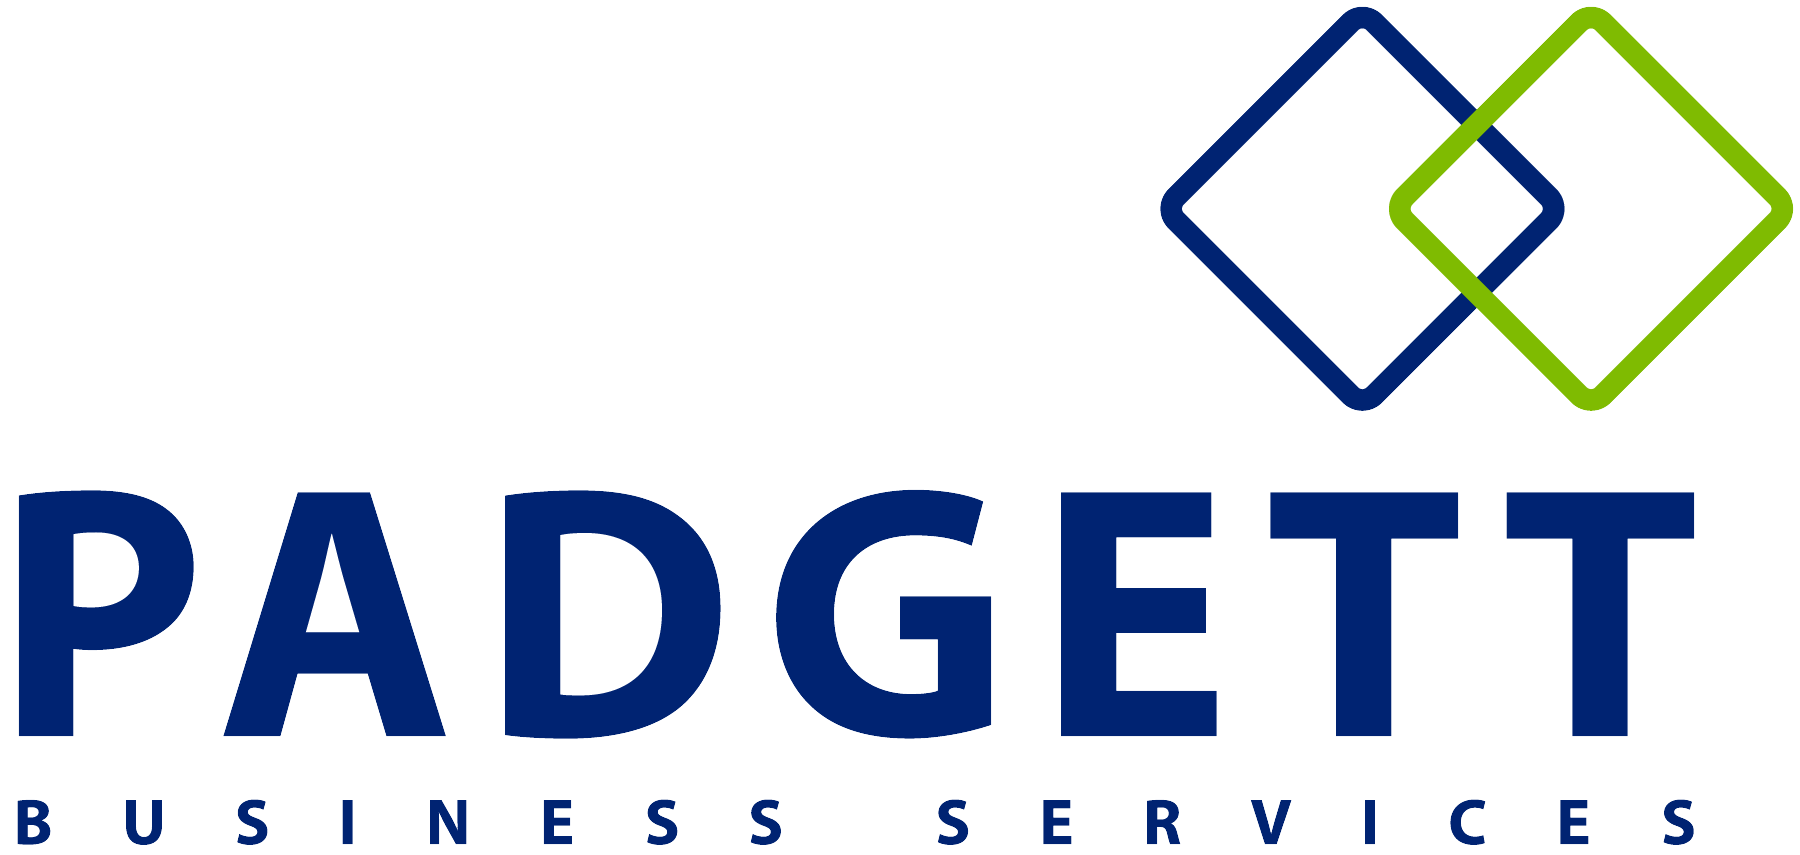 PADGETT BUSINESS SERVICES logo featuring two interconnected diamonds